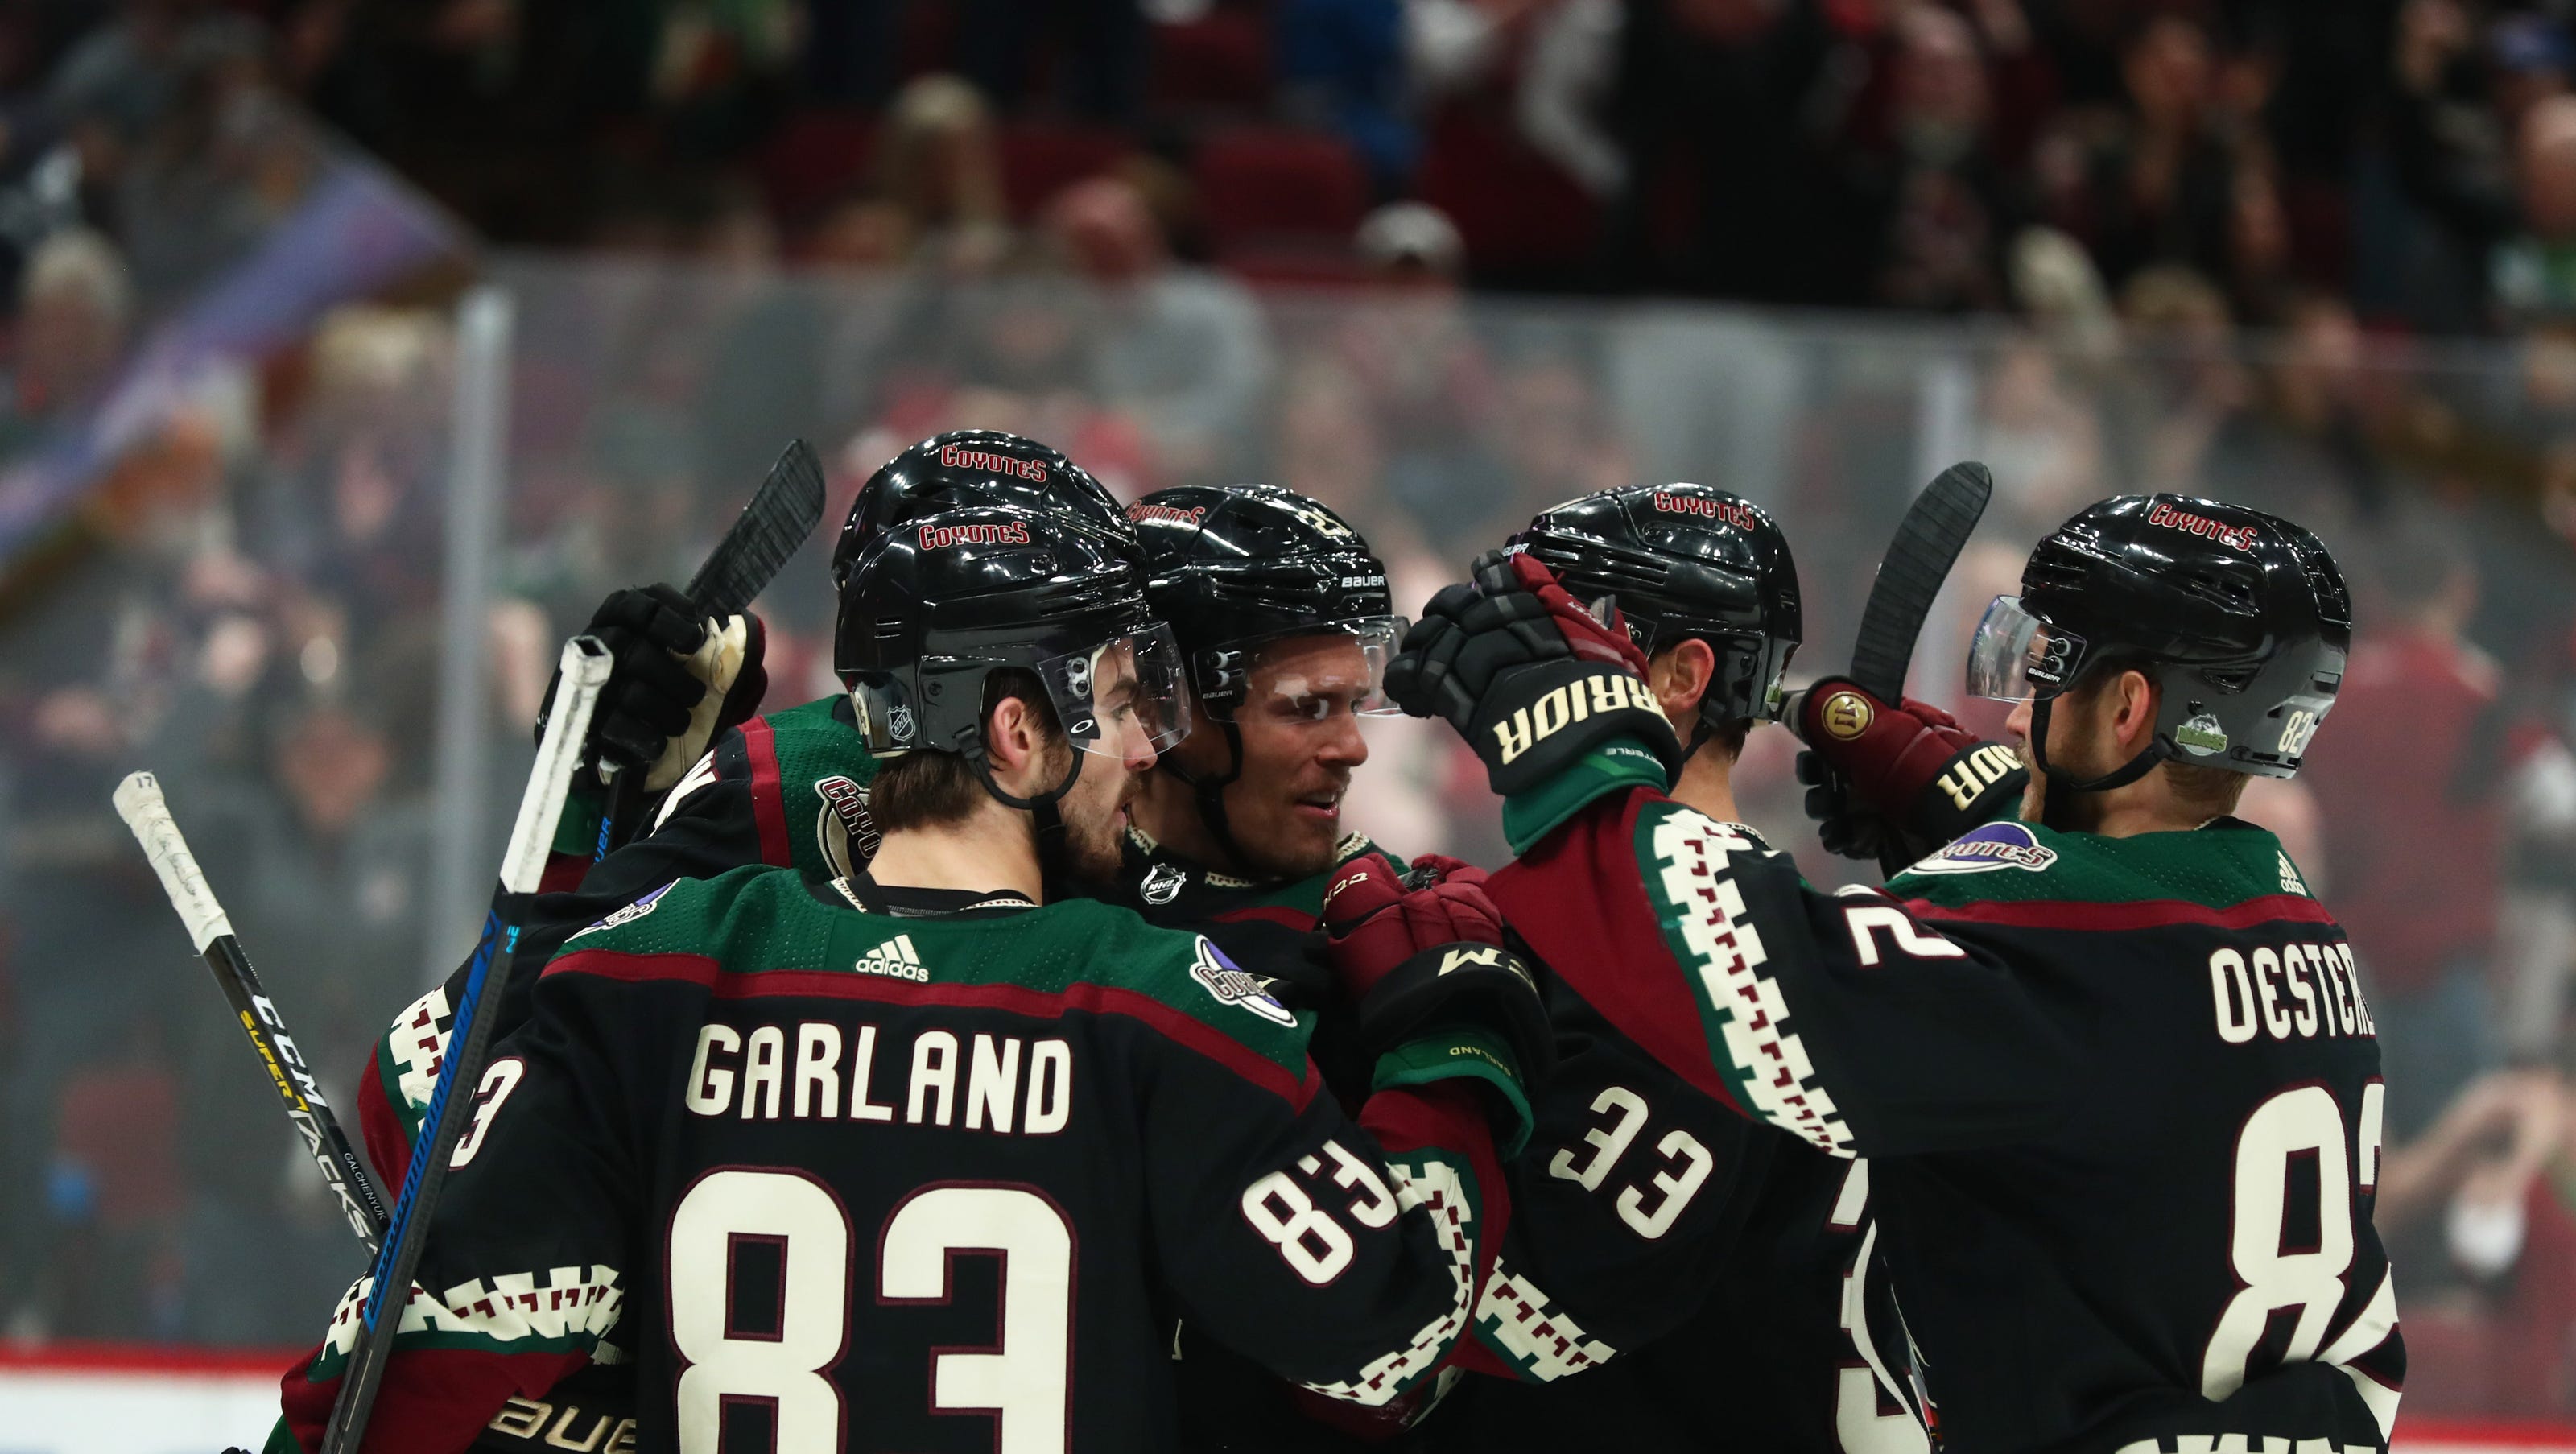 GSR owner close to purchasing majority share of NHL's Arizona Coyotes